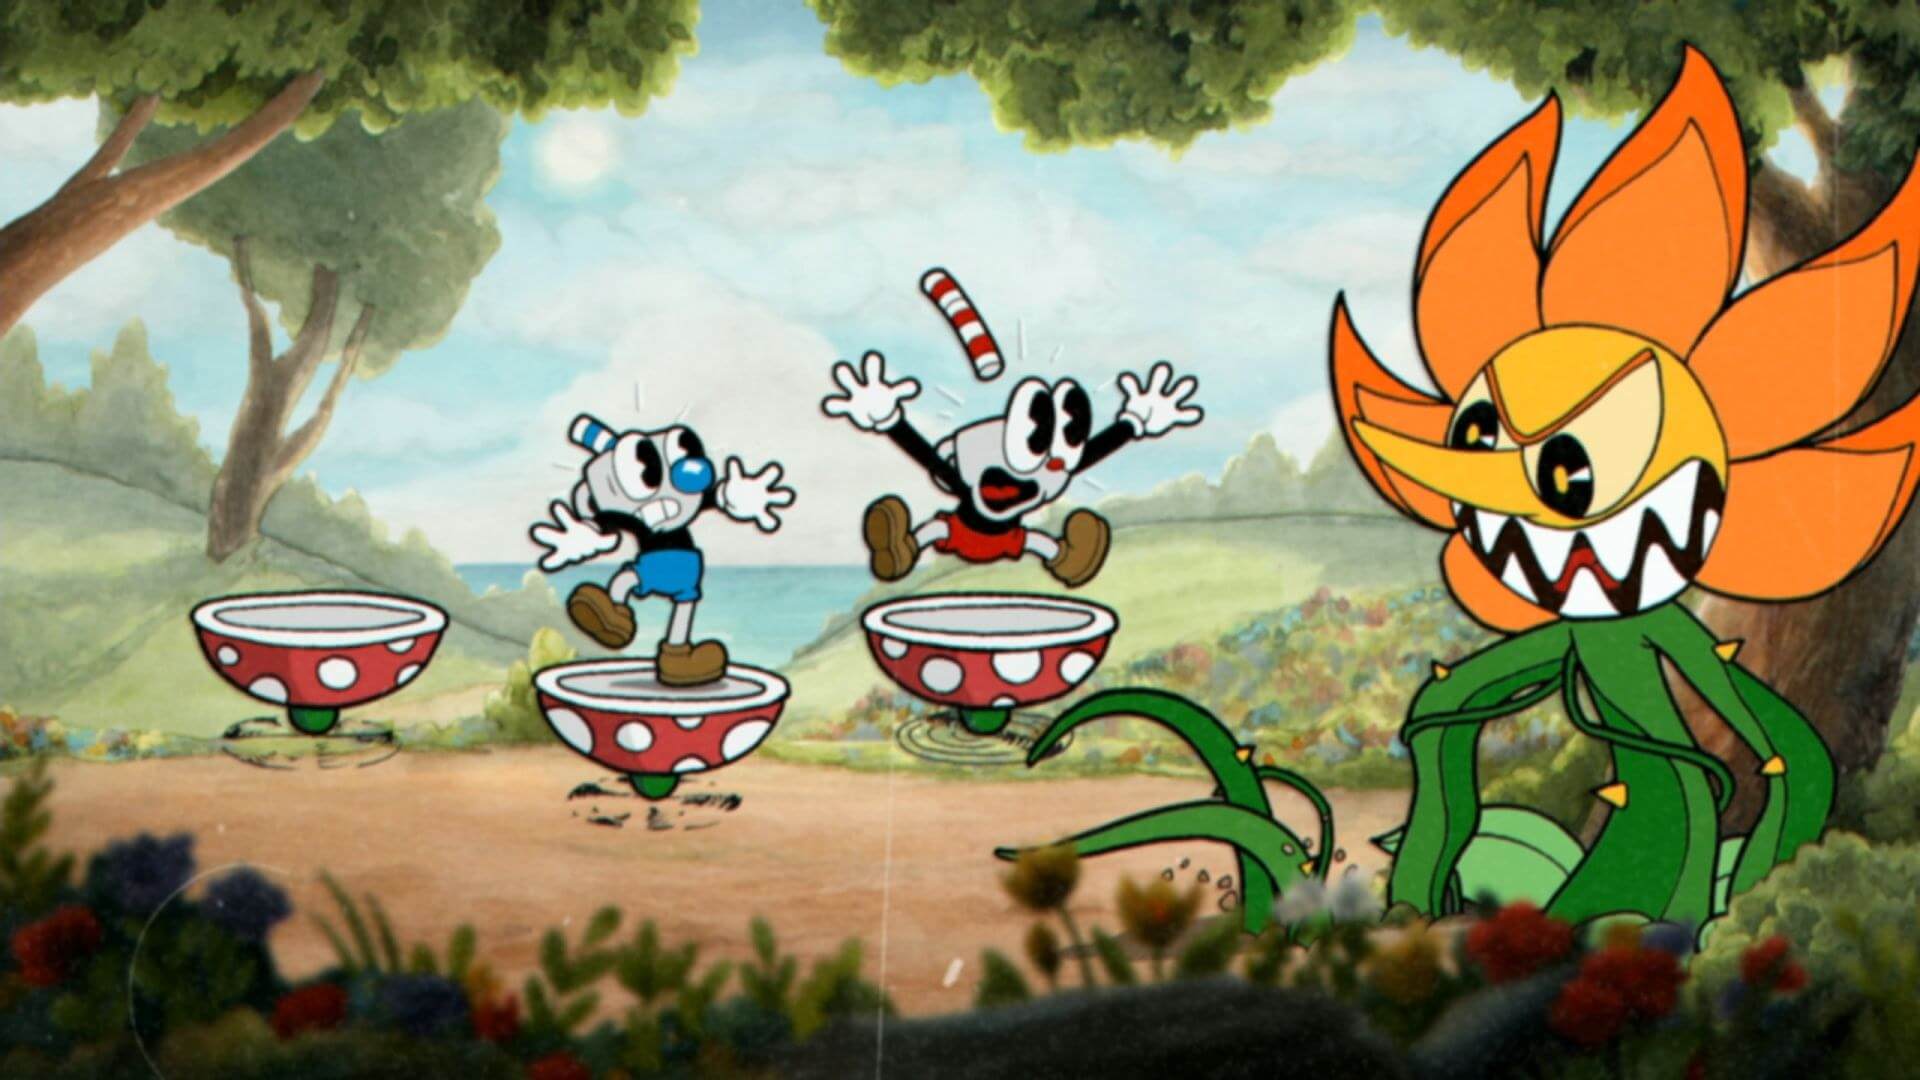 Where did that come from? Cuphead just landed on the PS4 today!